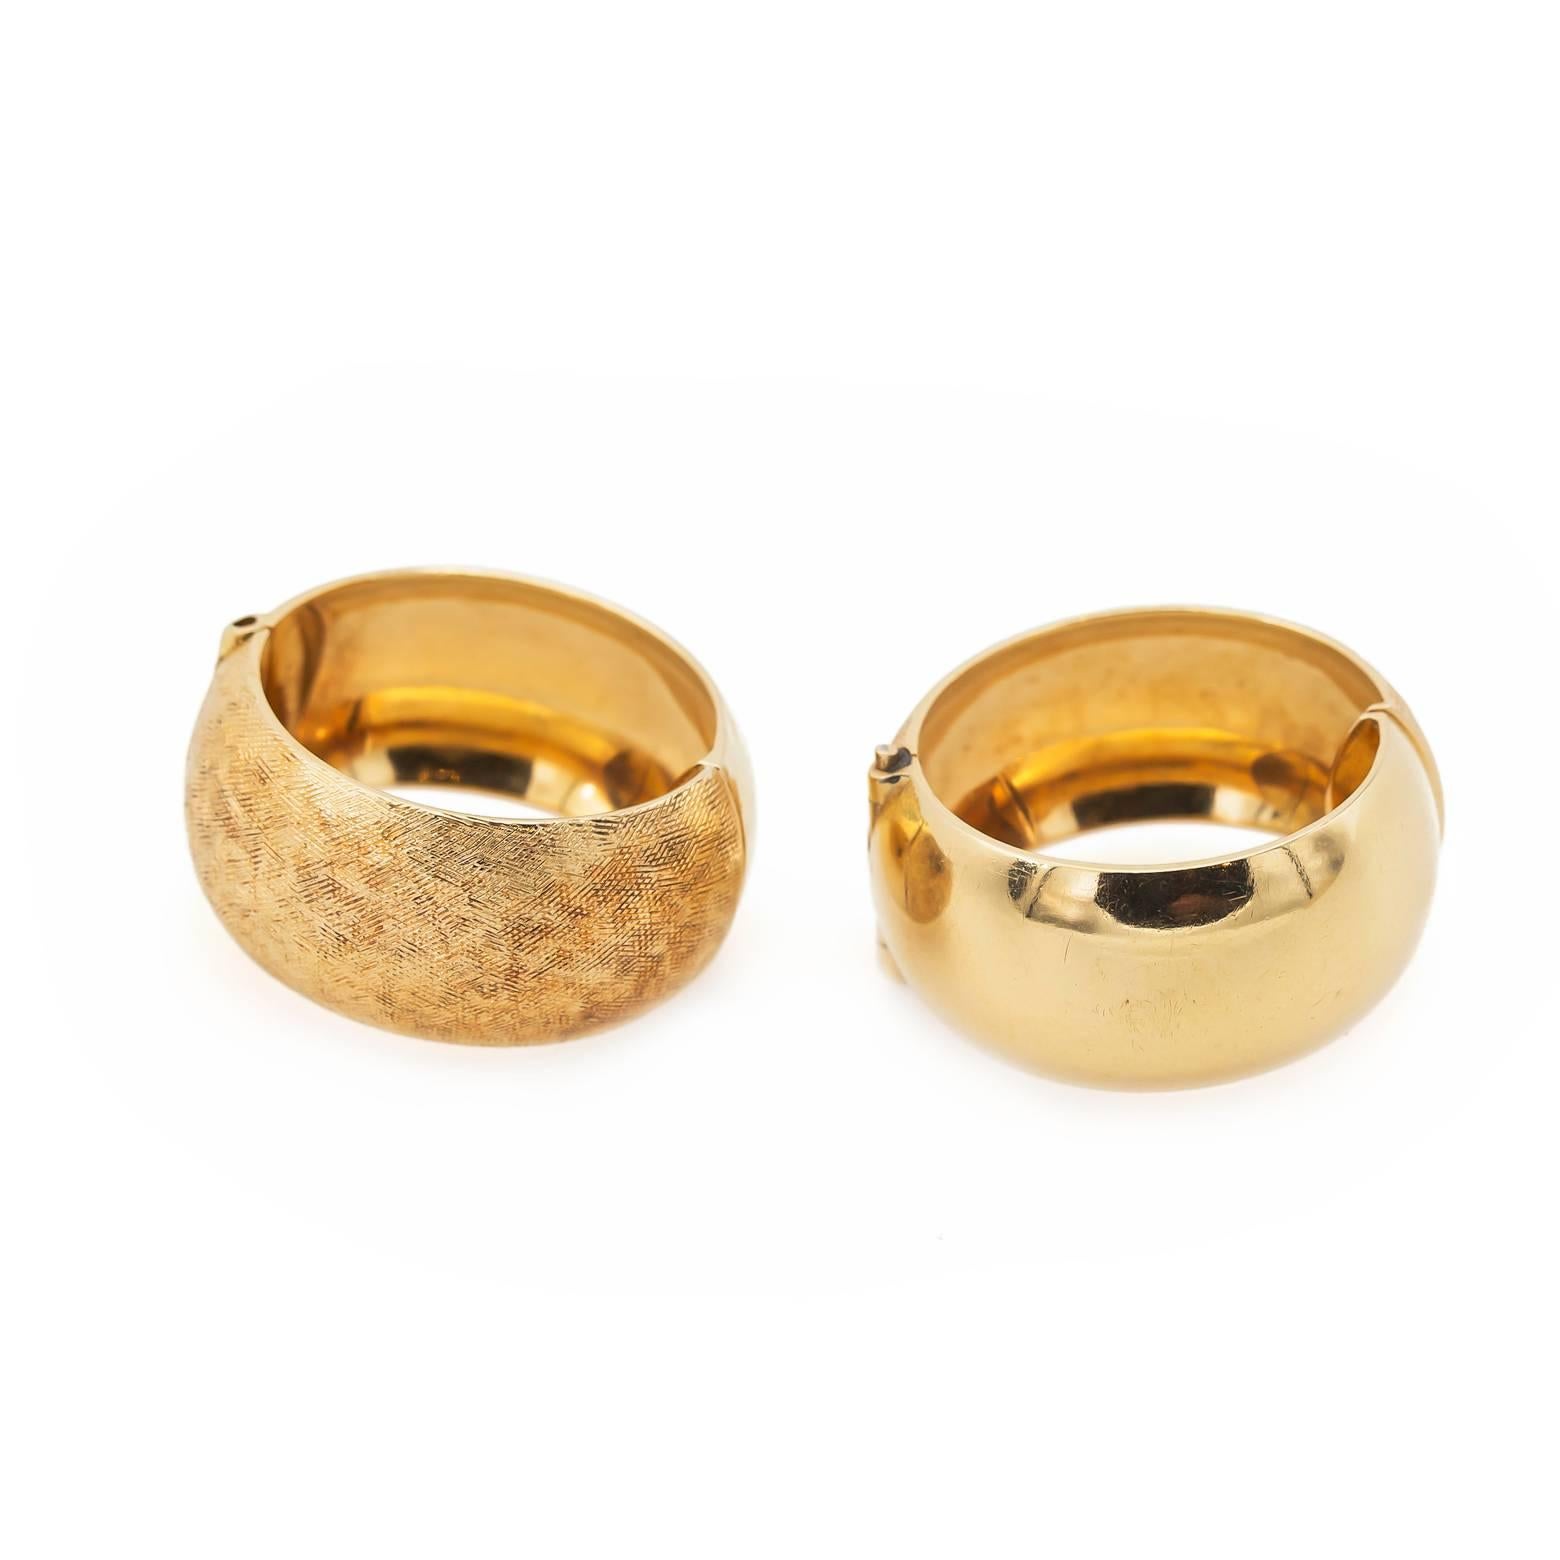 Very comfortable, reversible, and gorgeous! These textured hoop earrings are 14K yellow gold and can be worn with the hammered cross hatched texture showing in the front or with the pure and  polished side. Stunning!